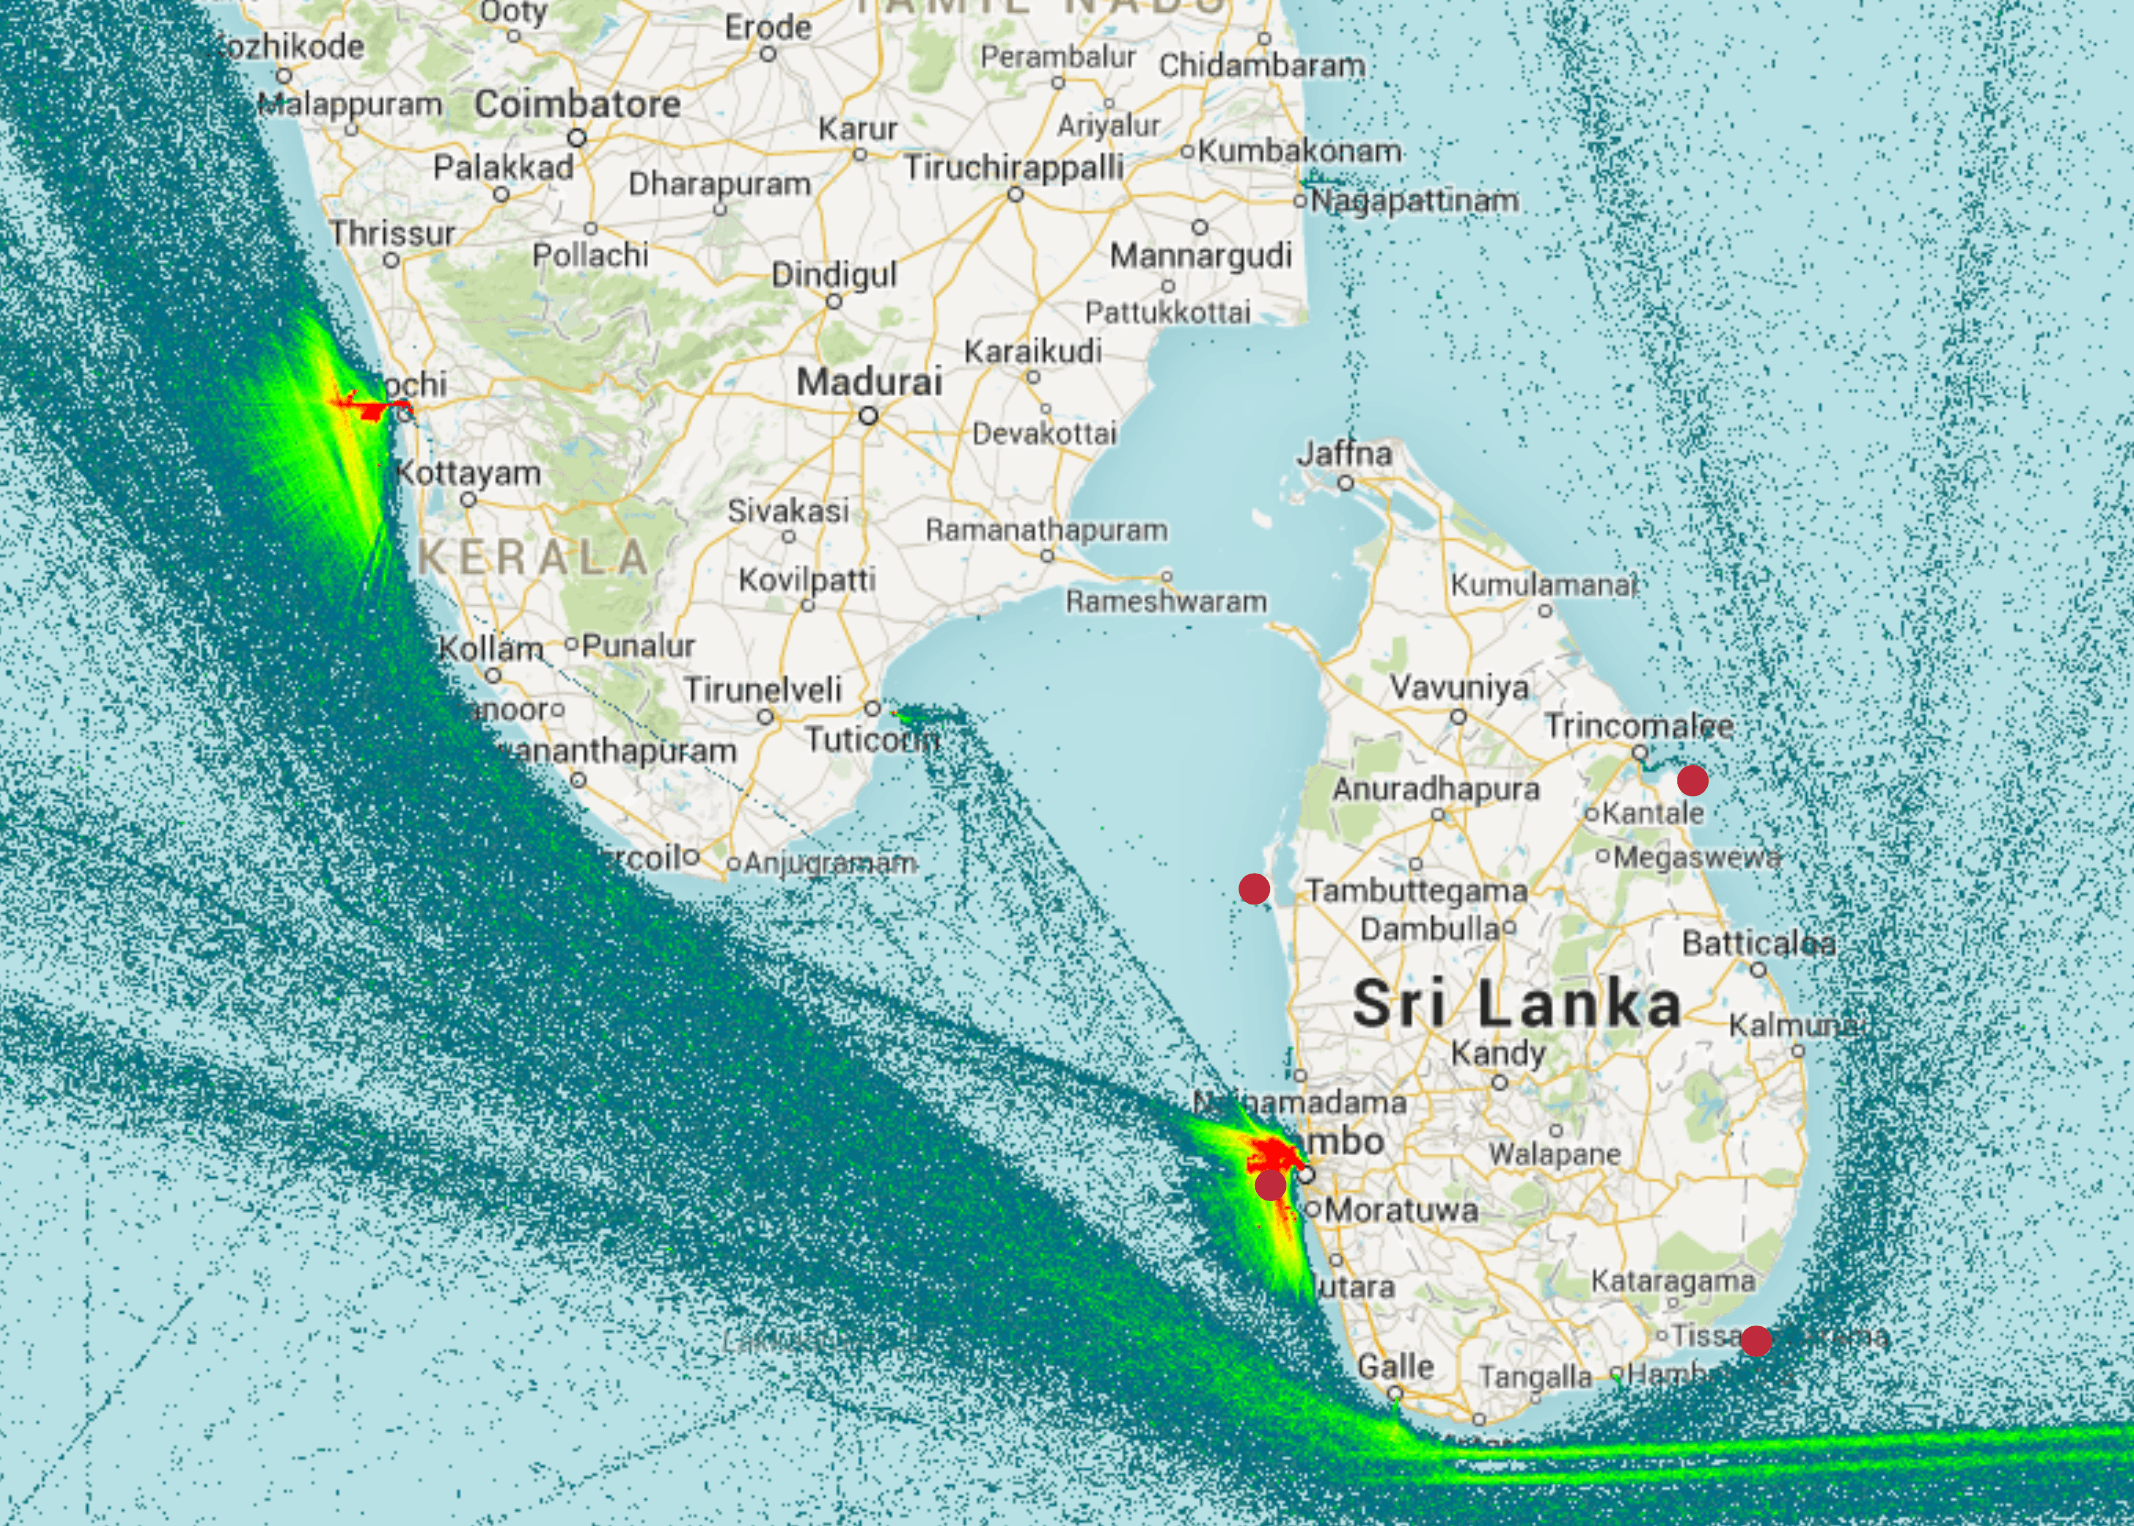 Drawing showing shipping traffic. Red dots: Identified Locations for Green fuels bunkering and export